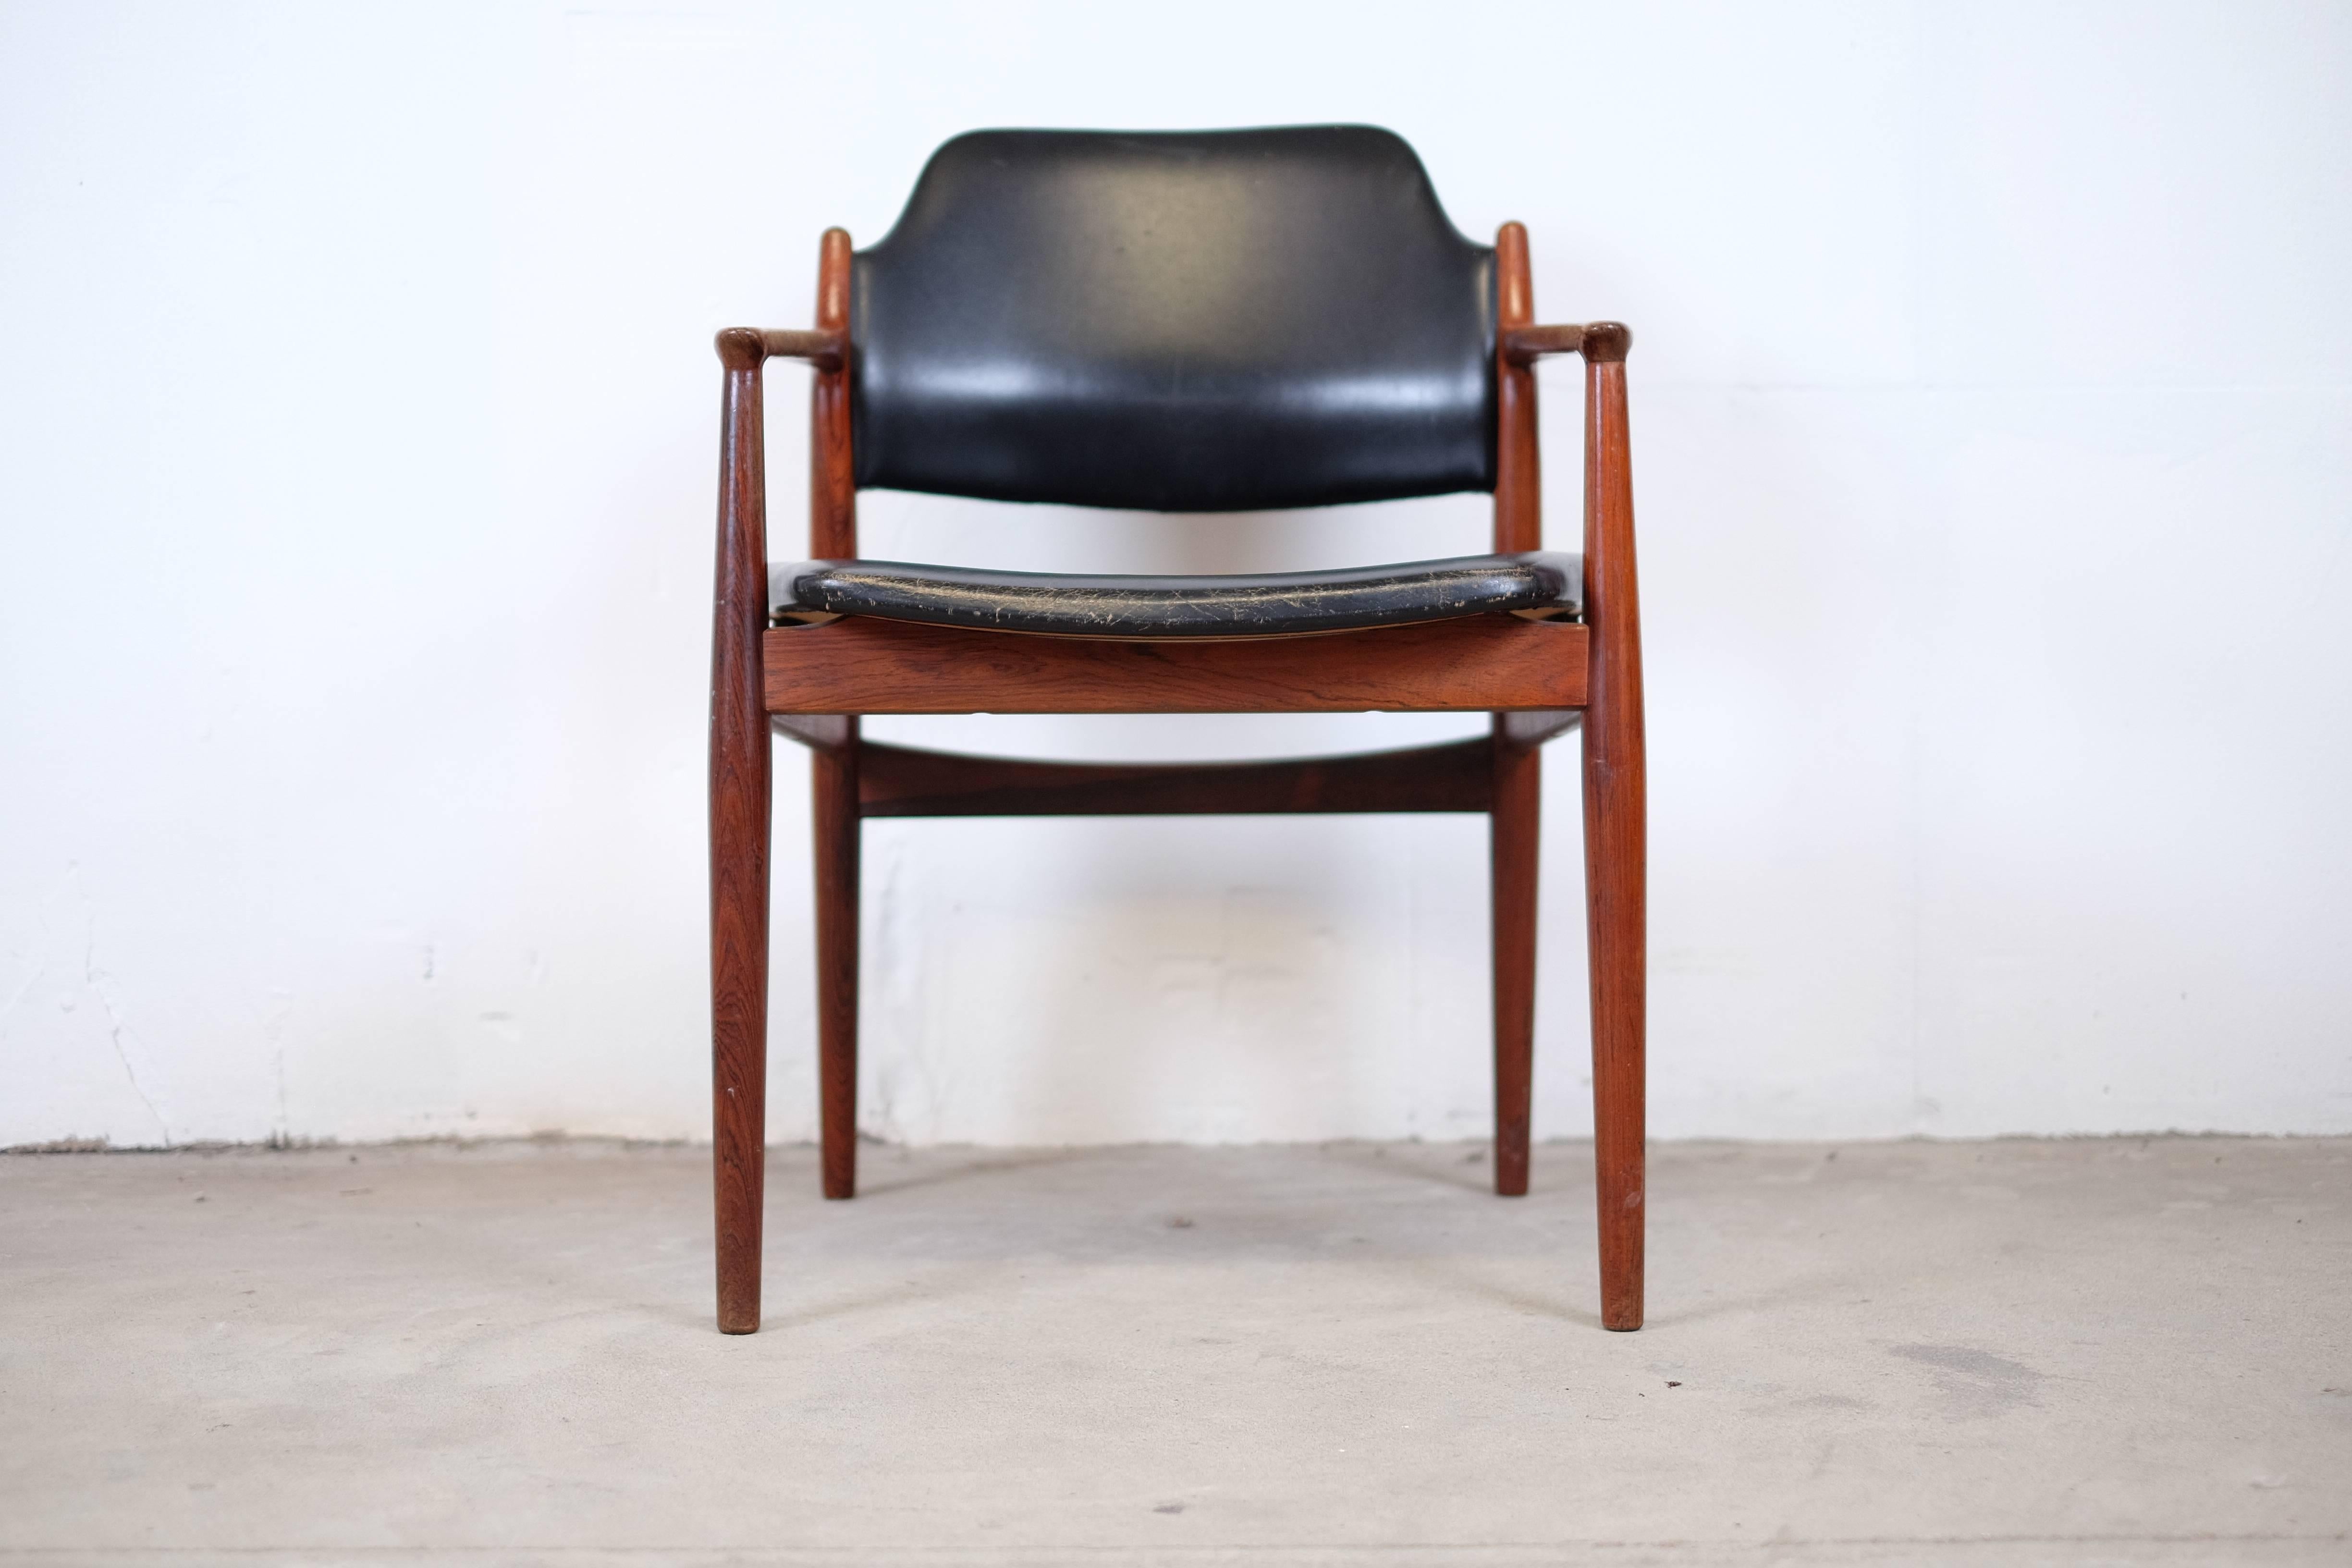 This beautiful and comfortable armchair in rosewood with teak arms is one of our personal favorites by Arne Vodders 
The chair is a true evidence of what result you get when the best combination of good designers and skilled cabinetmakers work